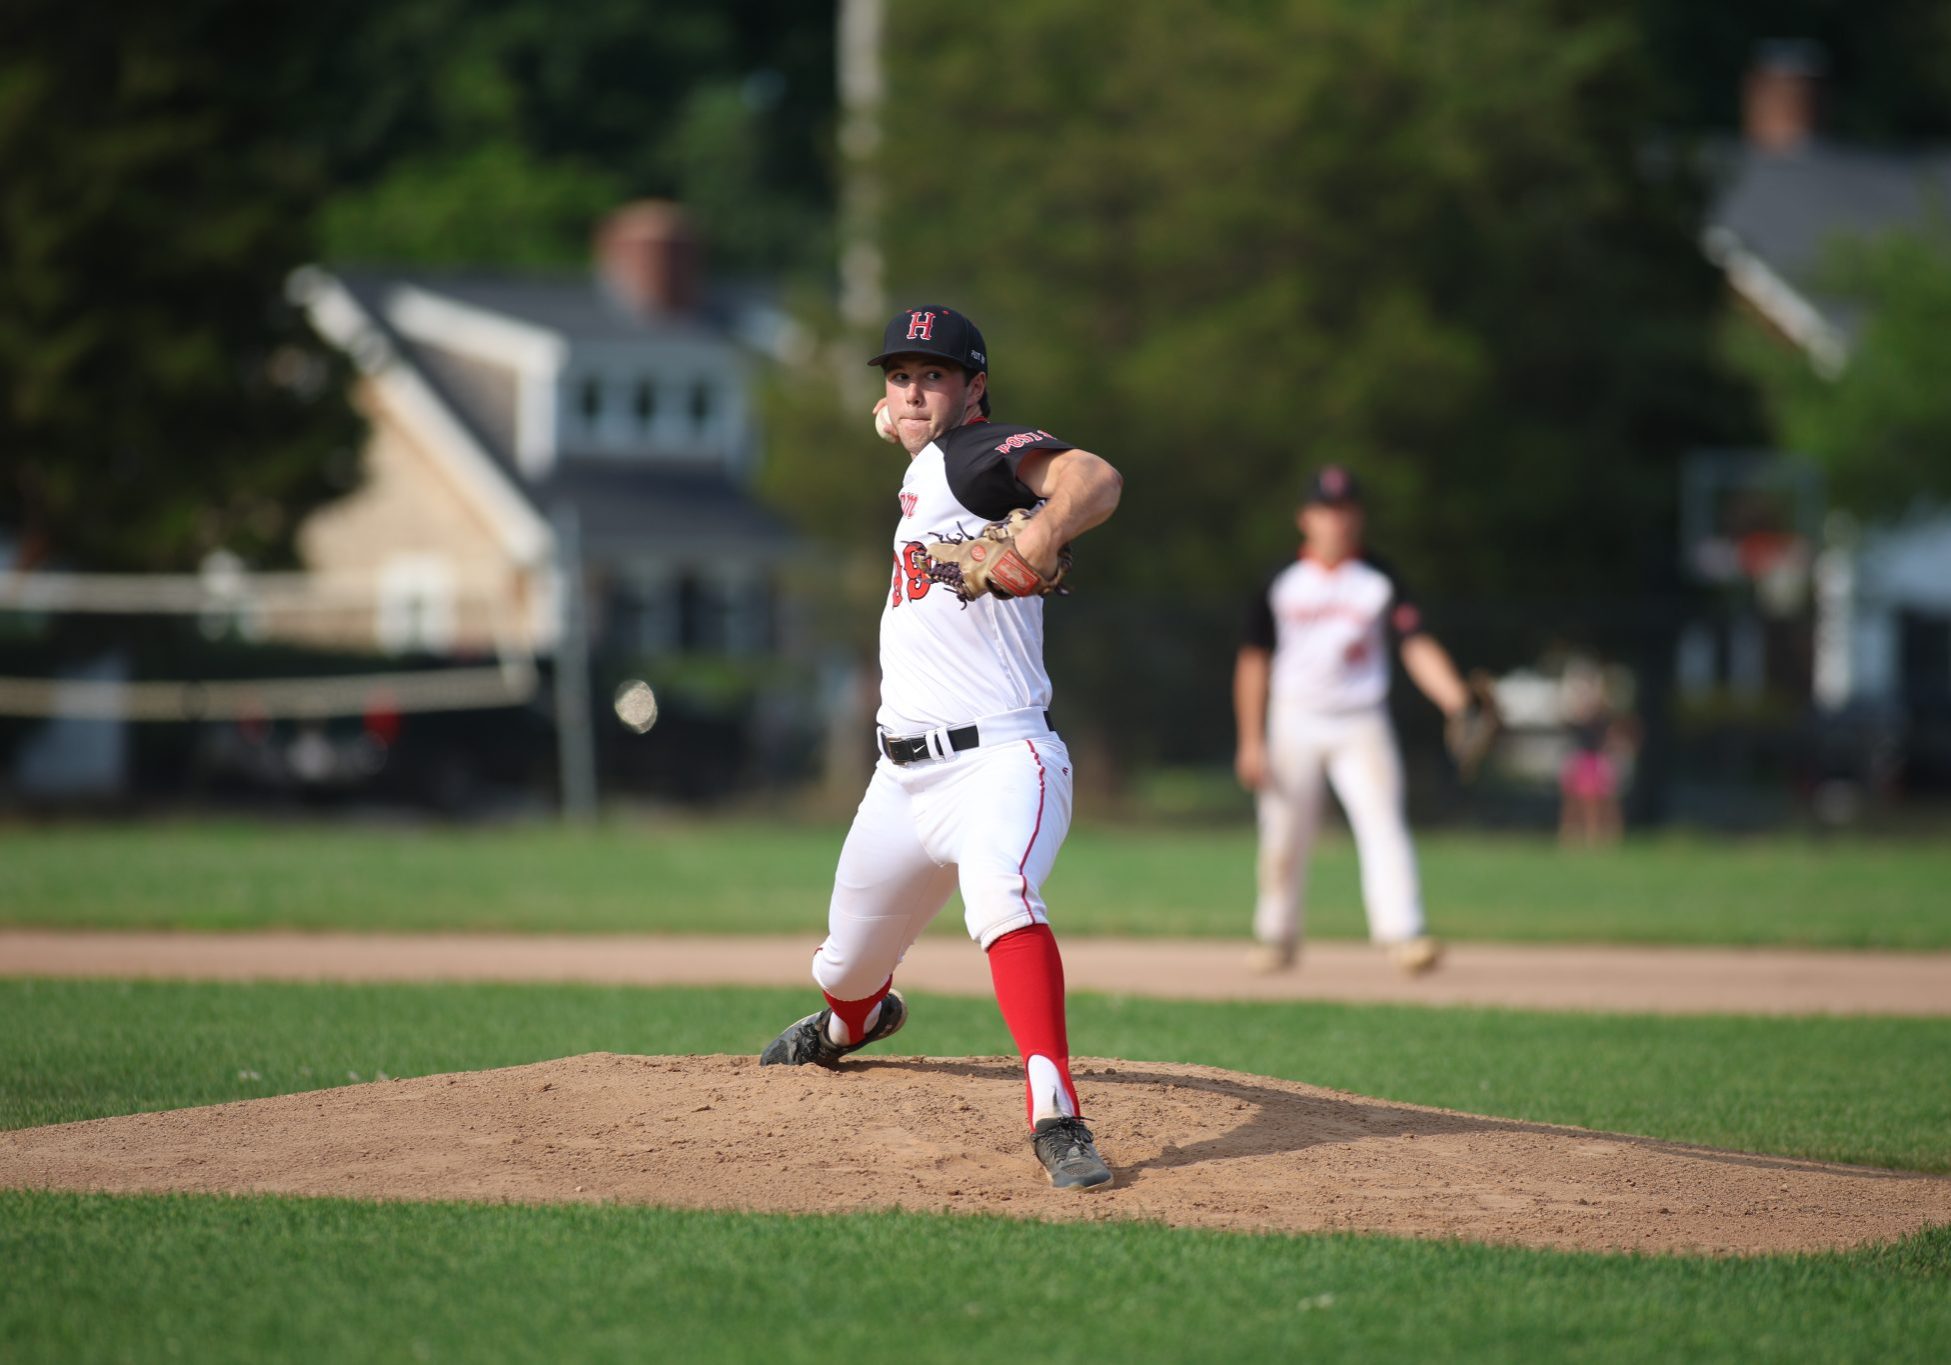 Former HHS baseball captain and current Hobart College player Jake Schulte leads Hingham Legion Post 120 into the State Championships.